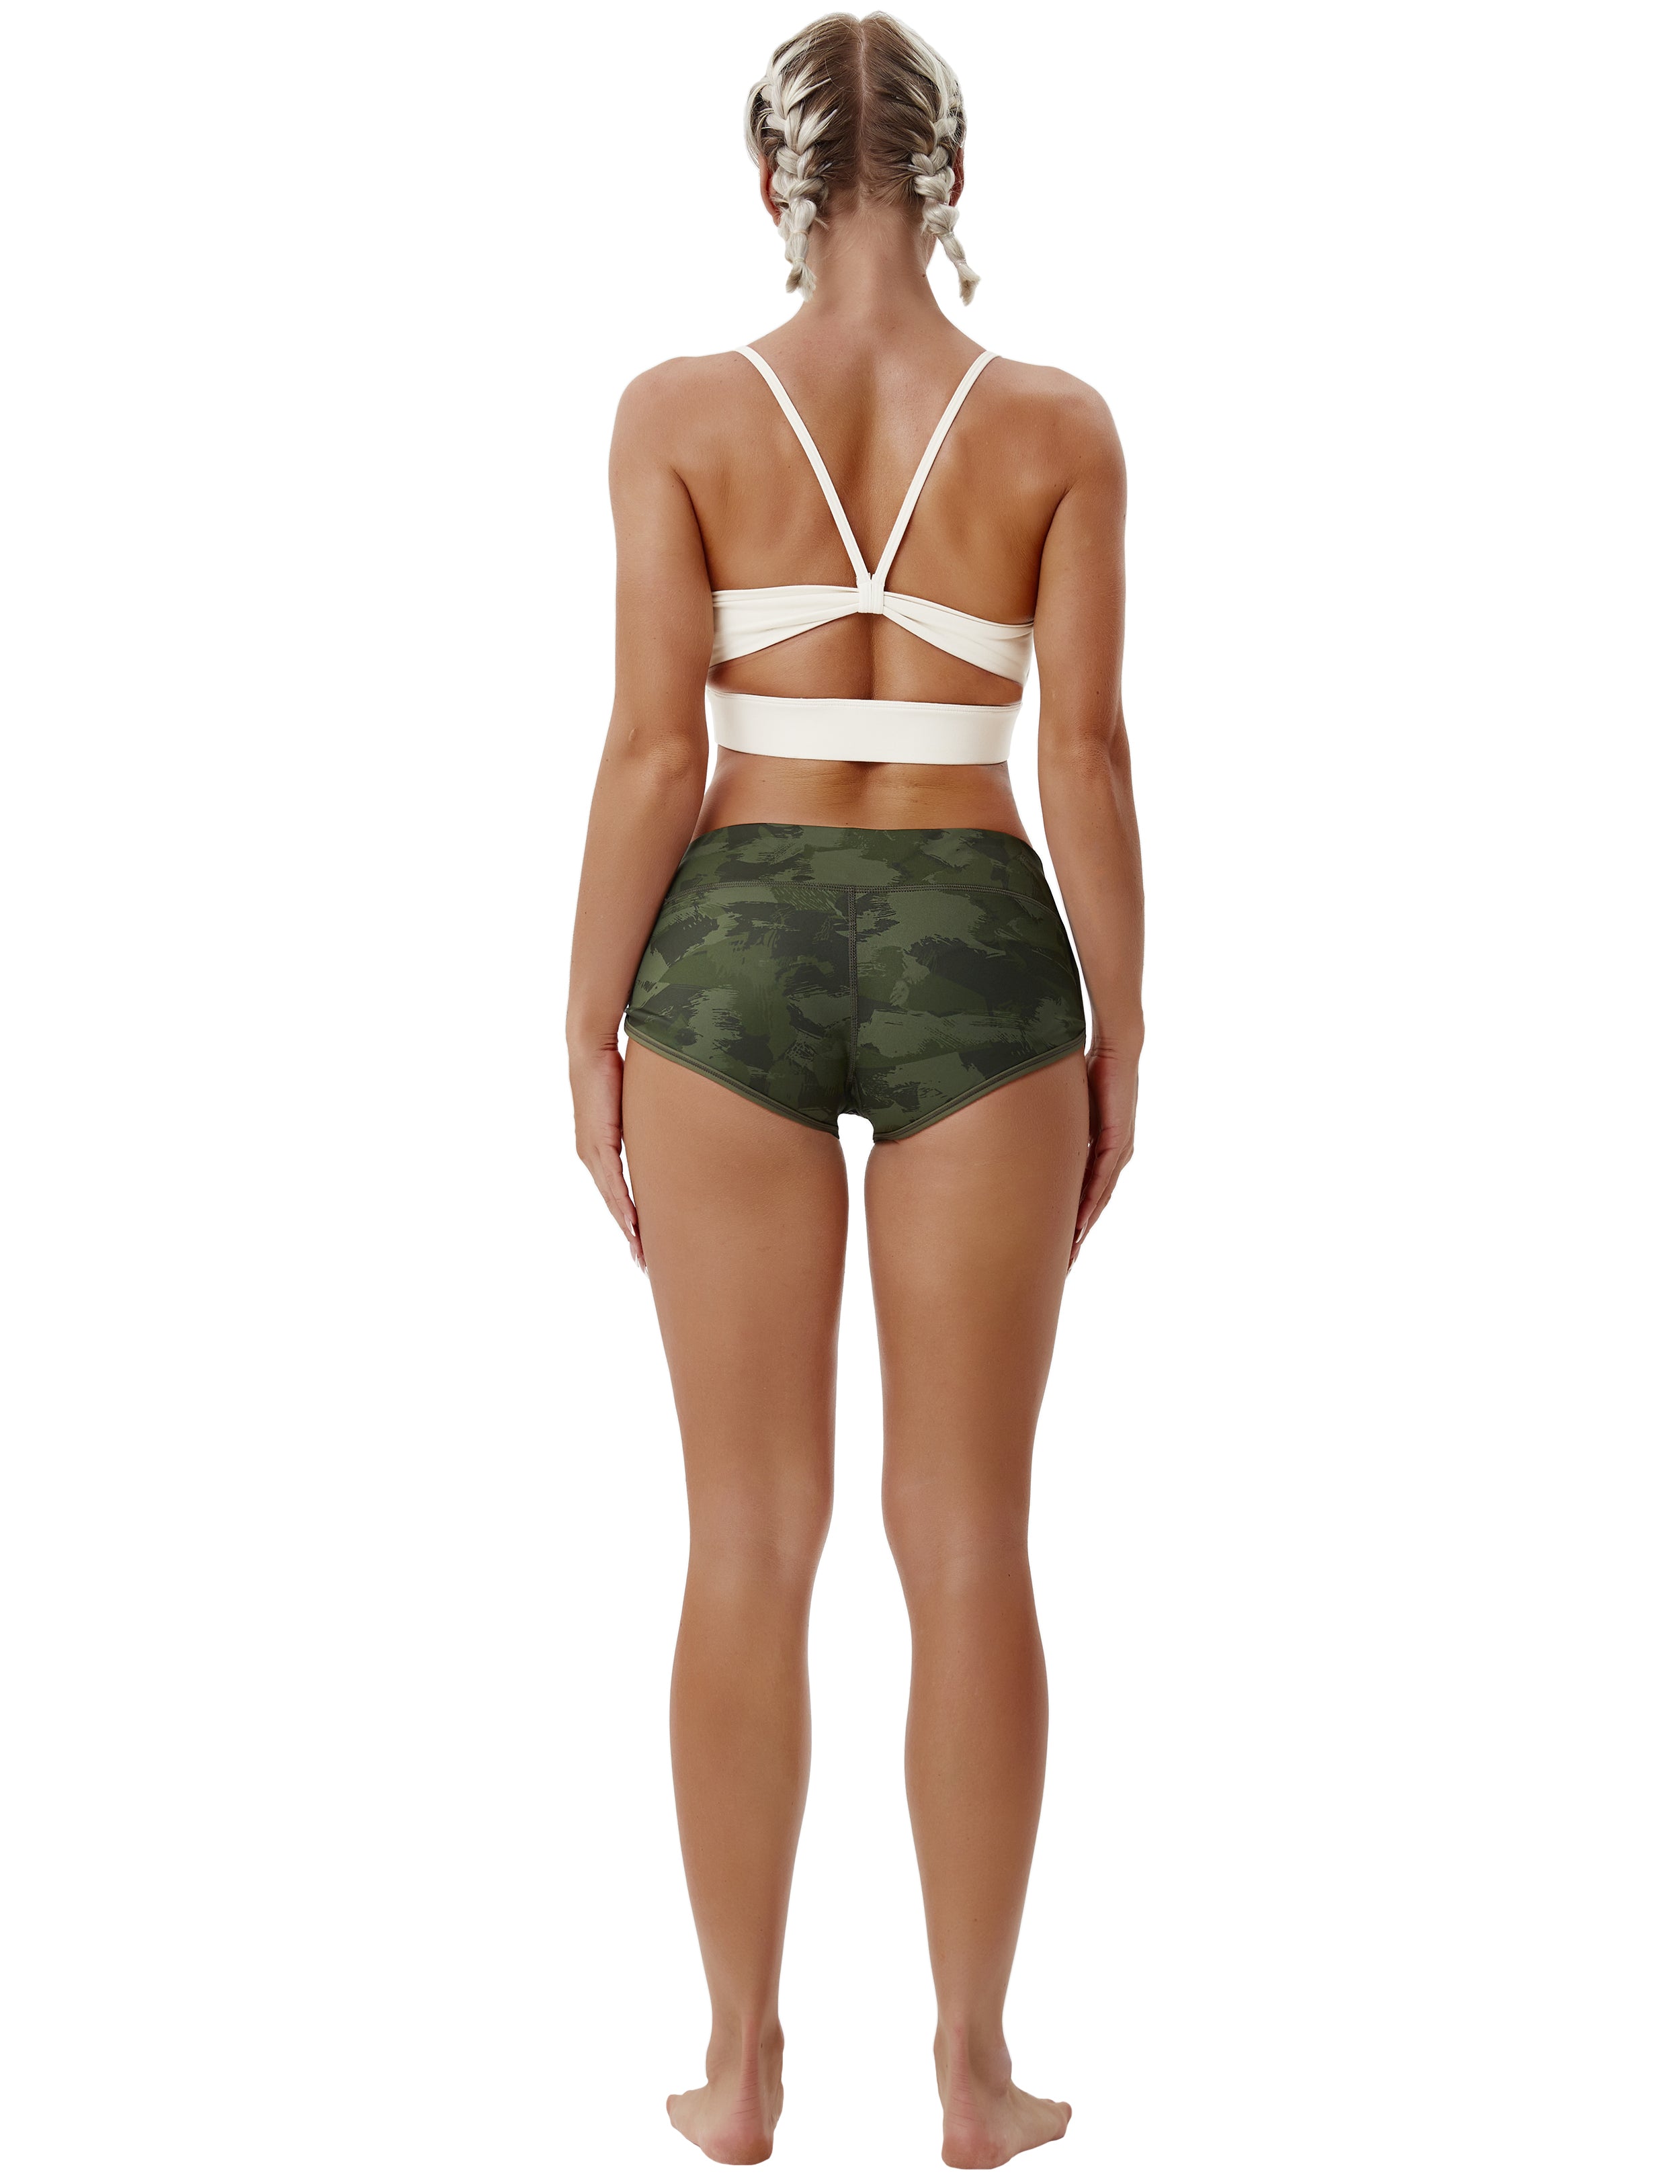 Printed Booty Jogging Shorts green brushcamo Sleek, soft, smooth and totally comfortable: our newest sexy style is here. Softest-ever fabric High elasticity High density 4-way stretch Fabric doesn't attract lint easily No see-through Moisture-wicking Machine wash 78% Polyester, 22% Spandex